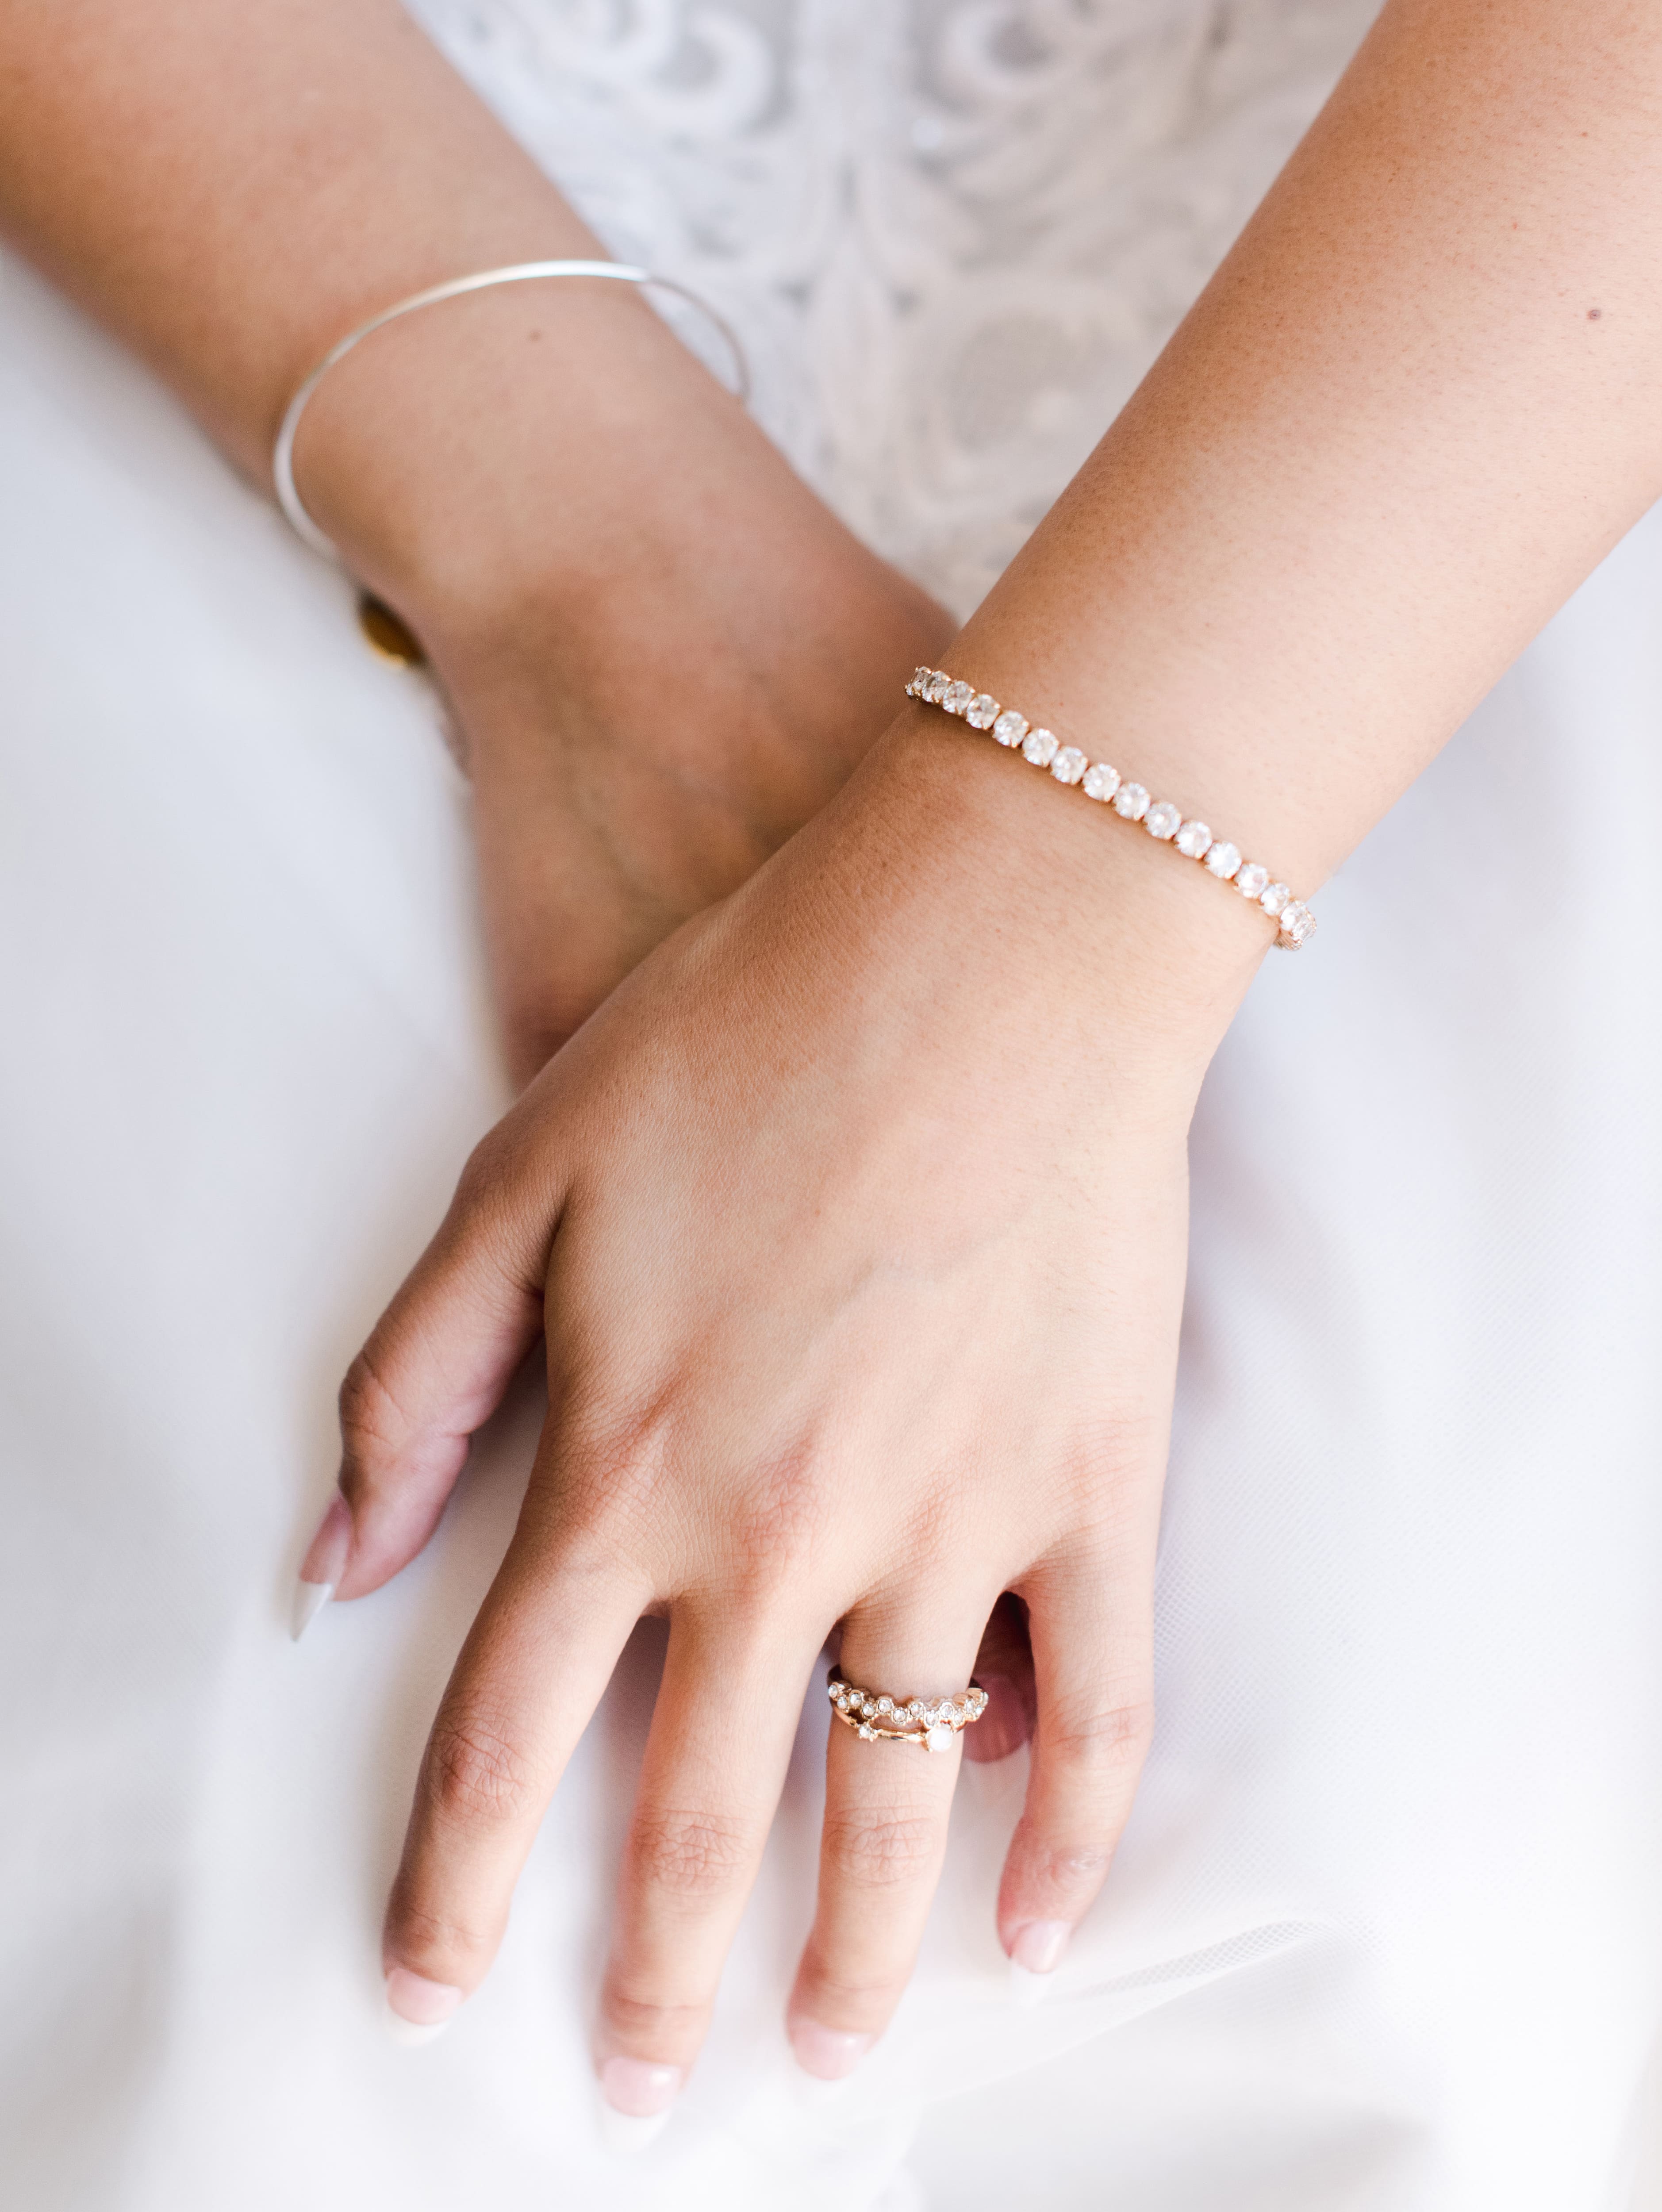 The Wedding Tennis Bracelet displayed from different angles, showcasing its exquisite design and dazzling diamonds.